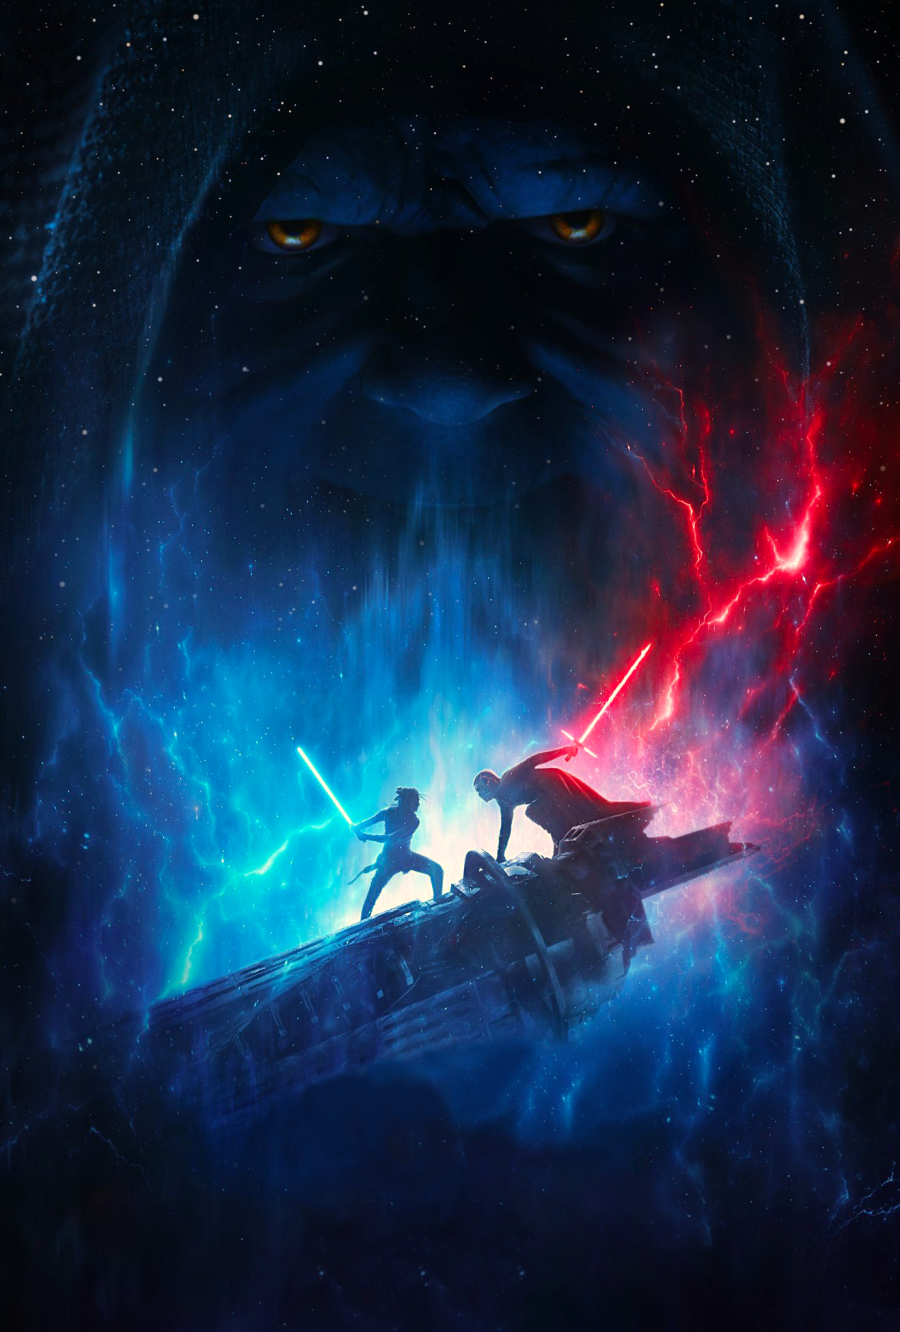 THE RISE OF SKYWALKER D23 POSTER TEXTLESS EDIT 00.png